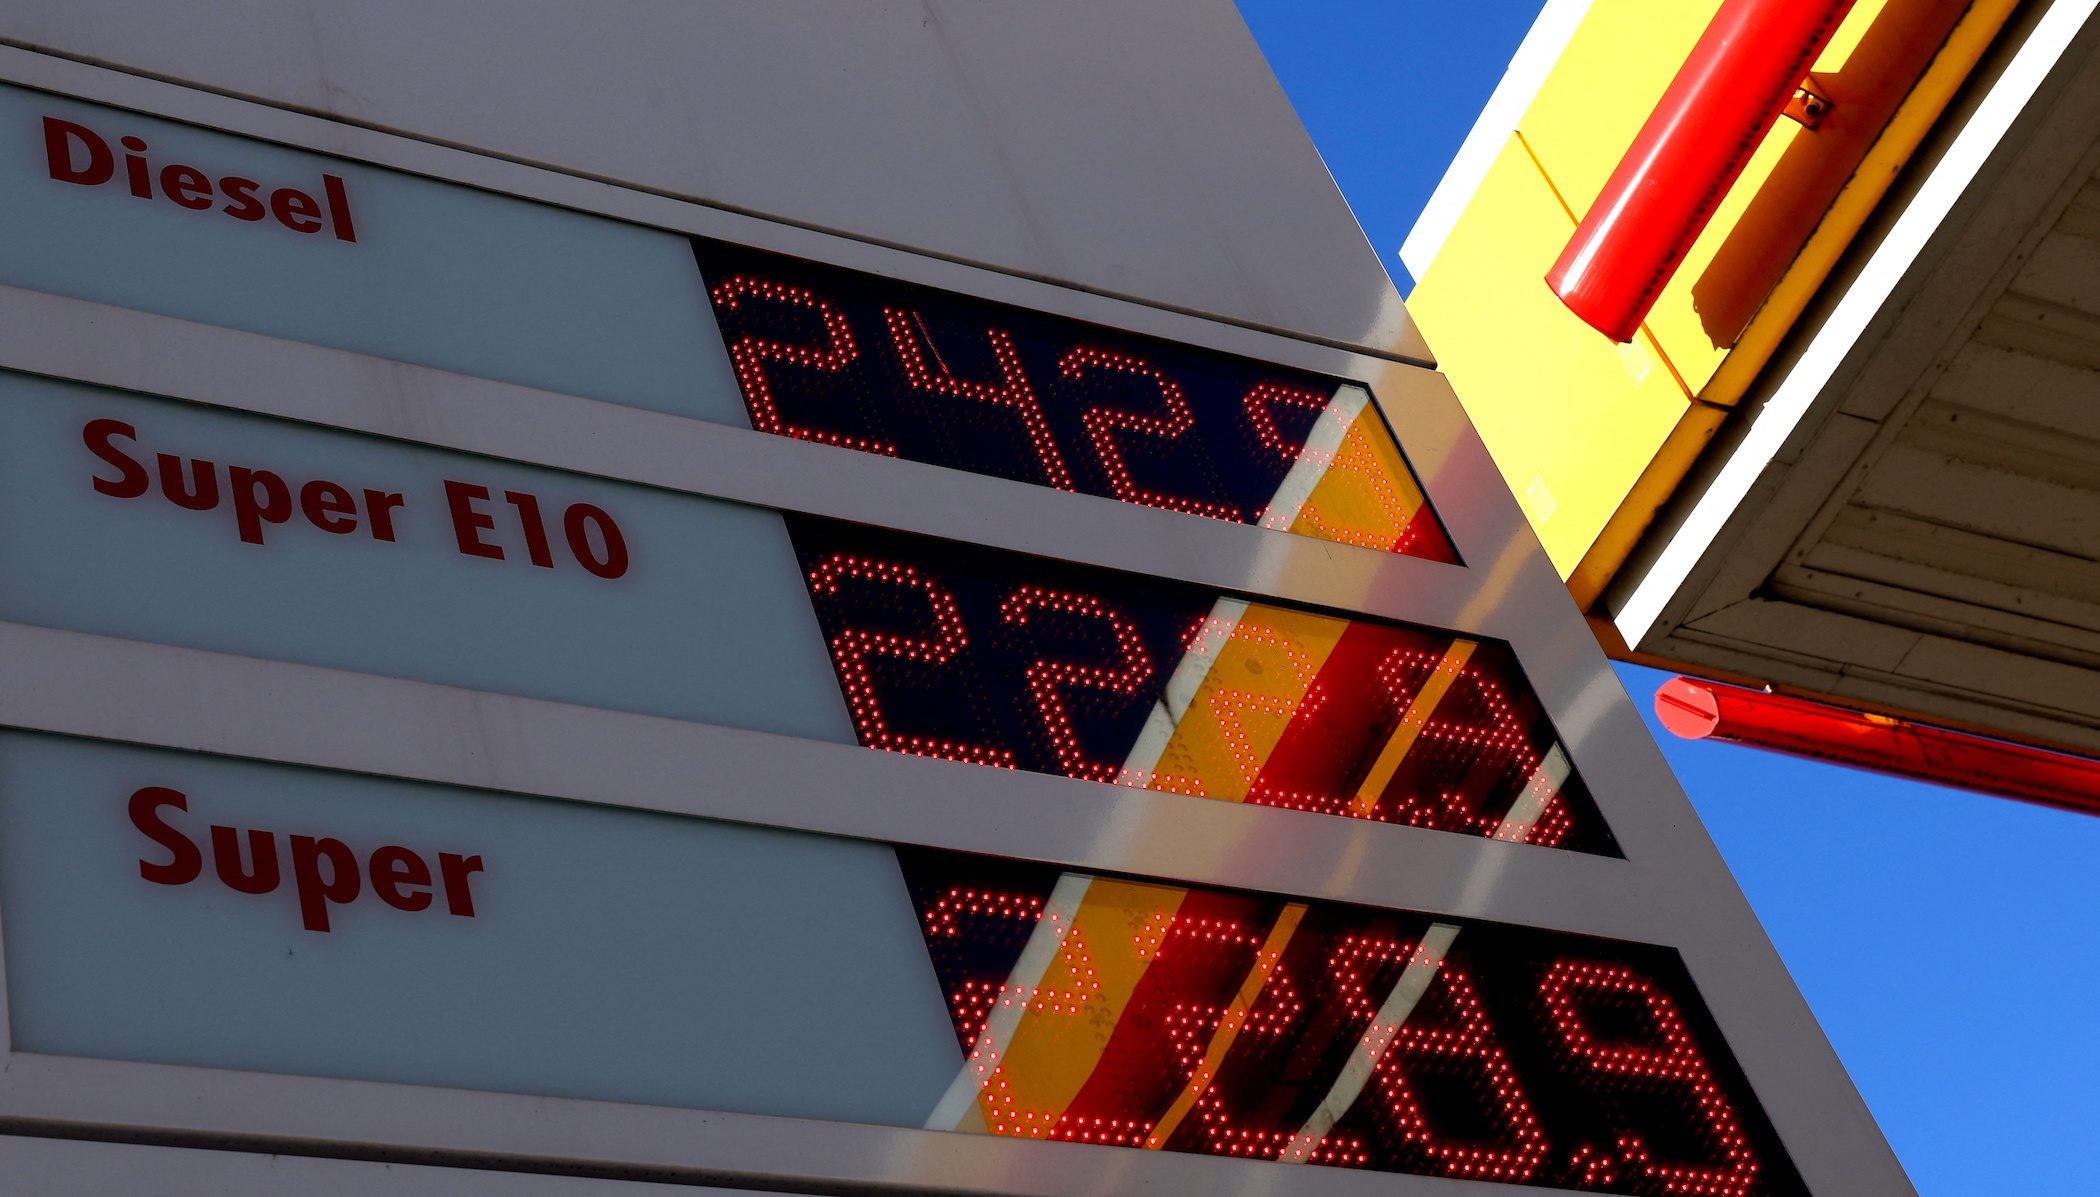 As fuel prices rise to record highs, governments look for solutions